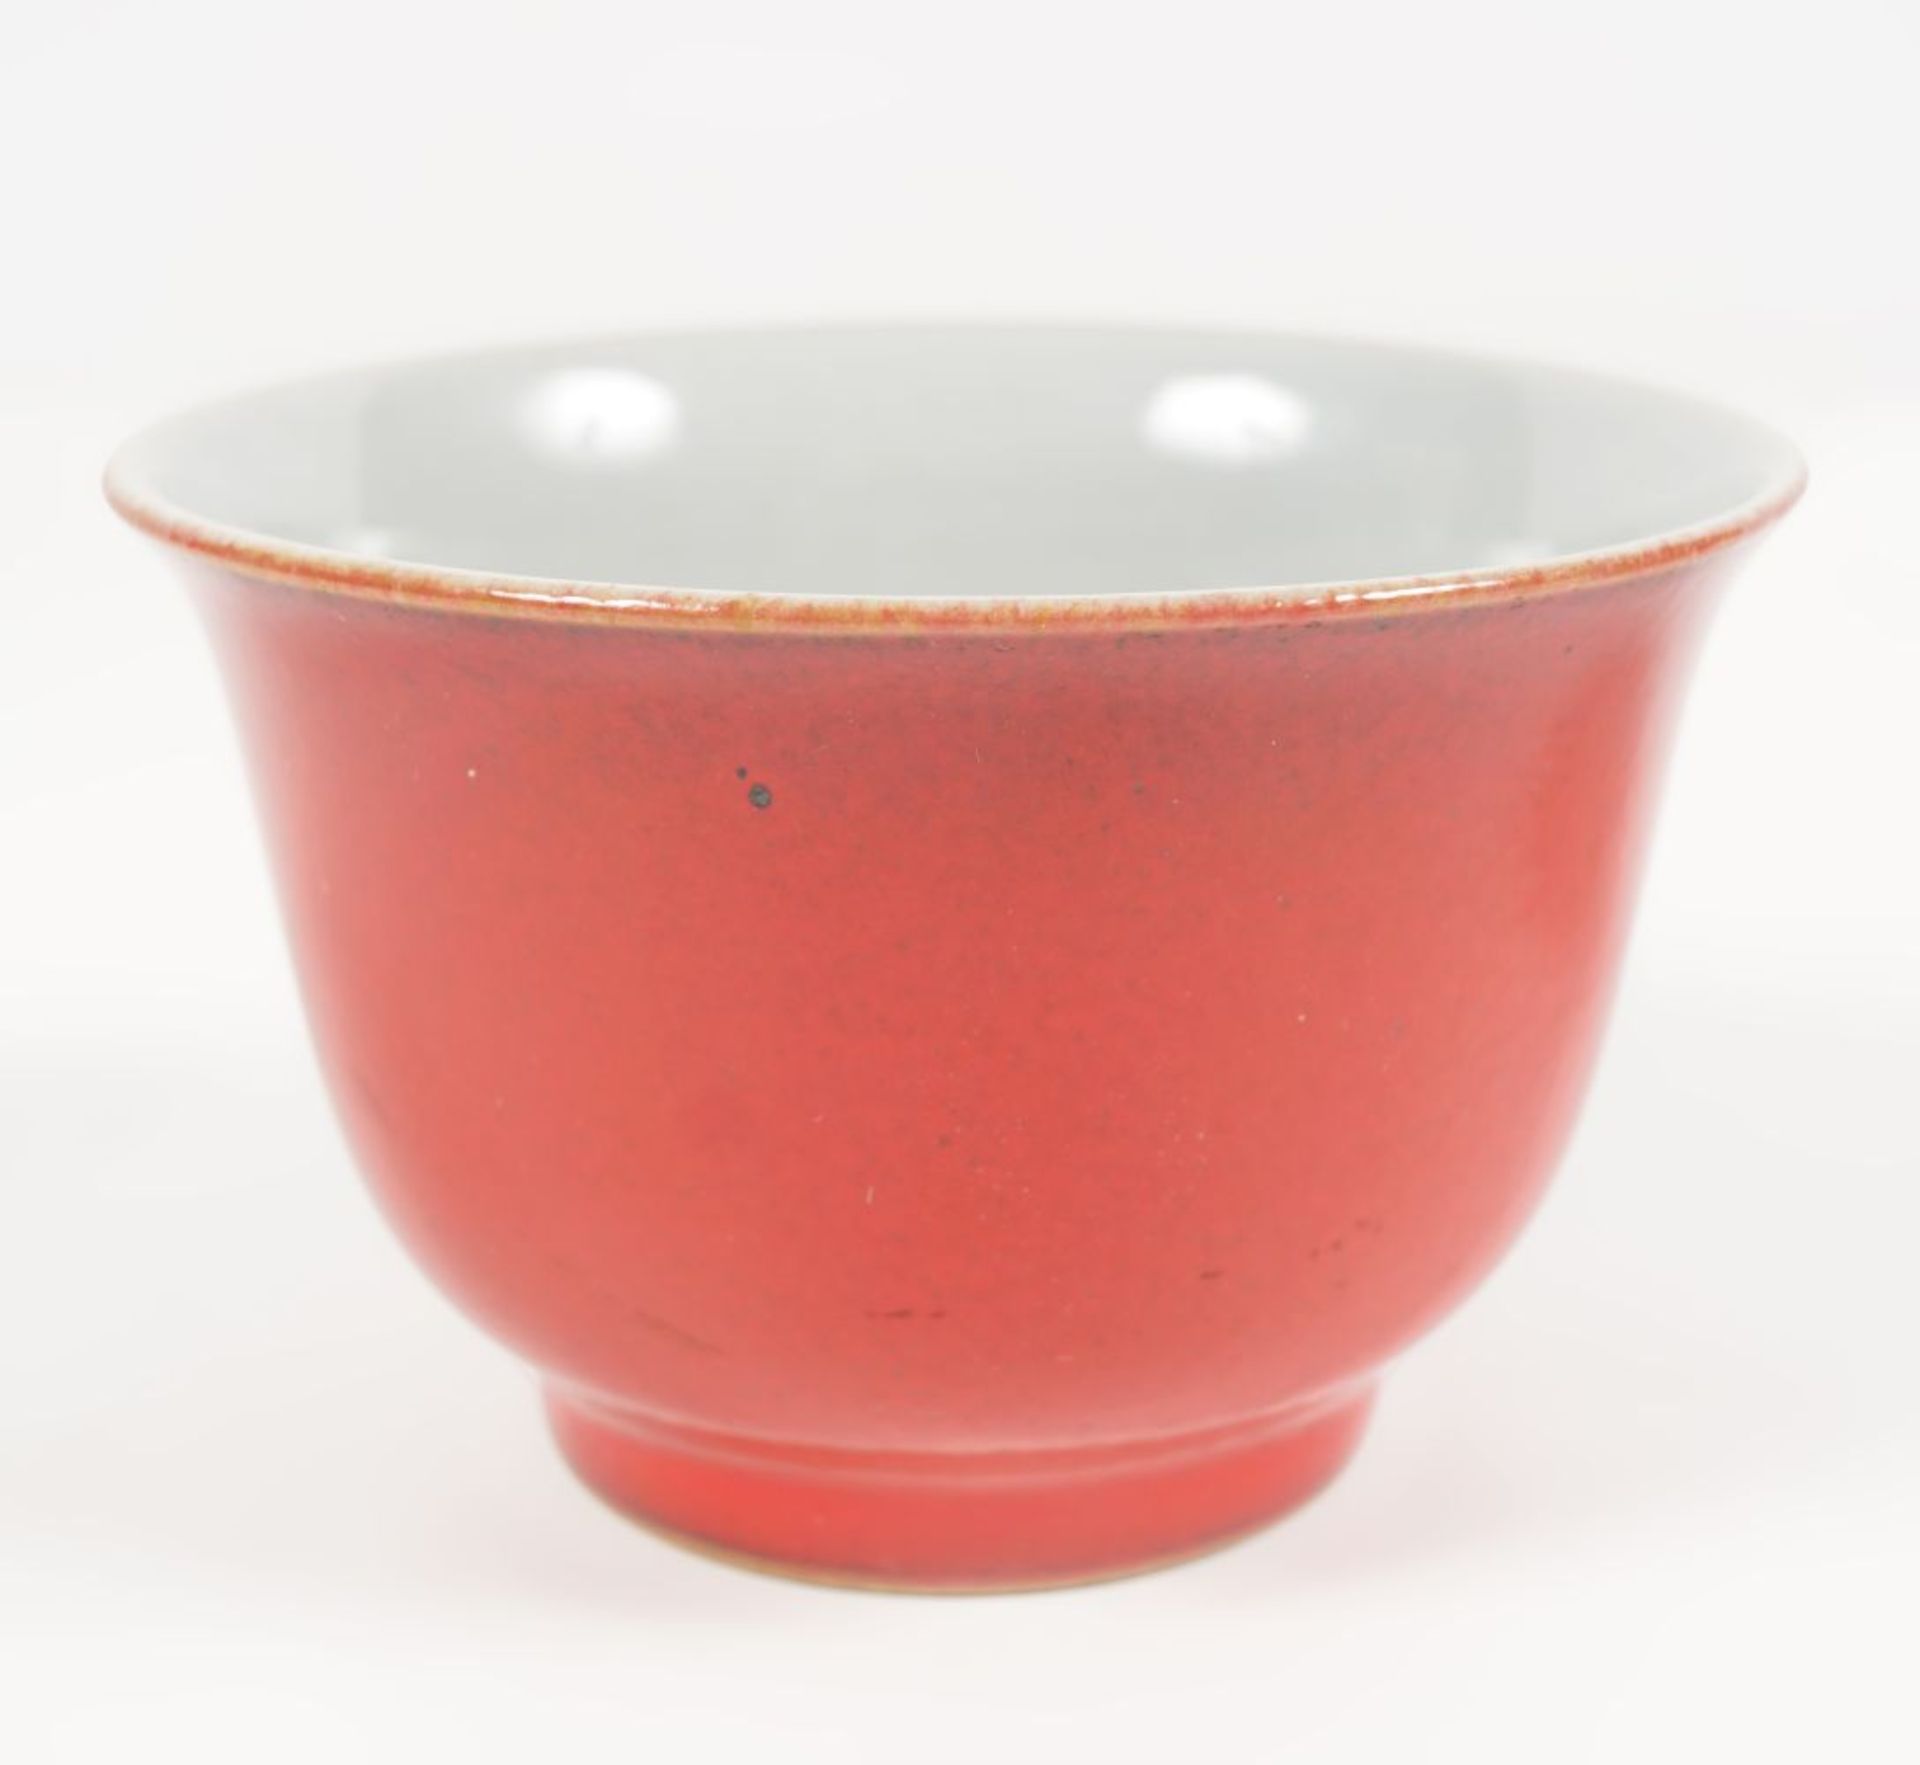 PAIR OF CHINESE QING CORAL GLAZED BOWLS - Image 2 of 3